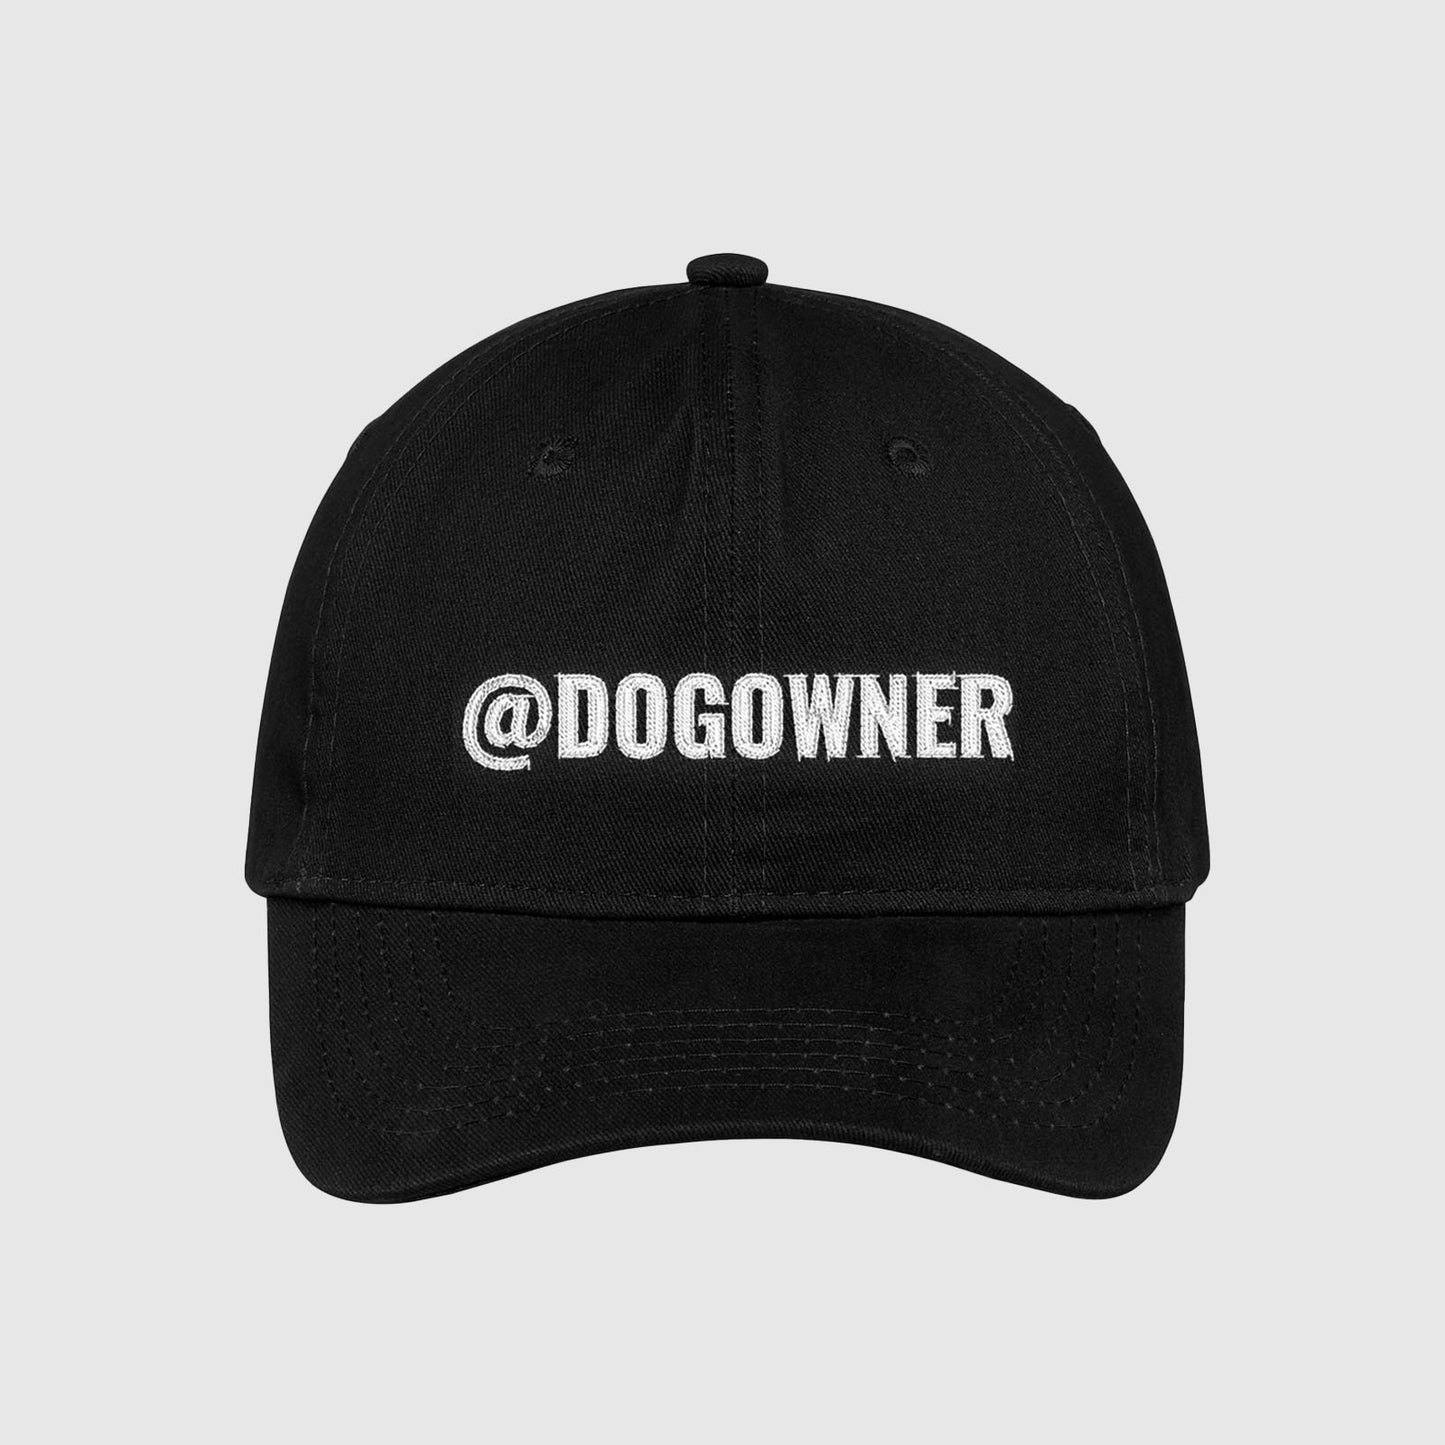 Black customizable hat with your social media handle embroidered on the front.